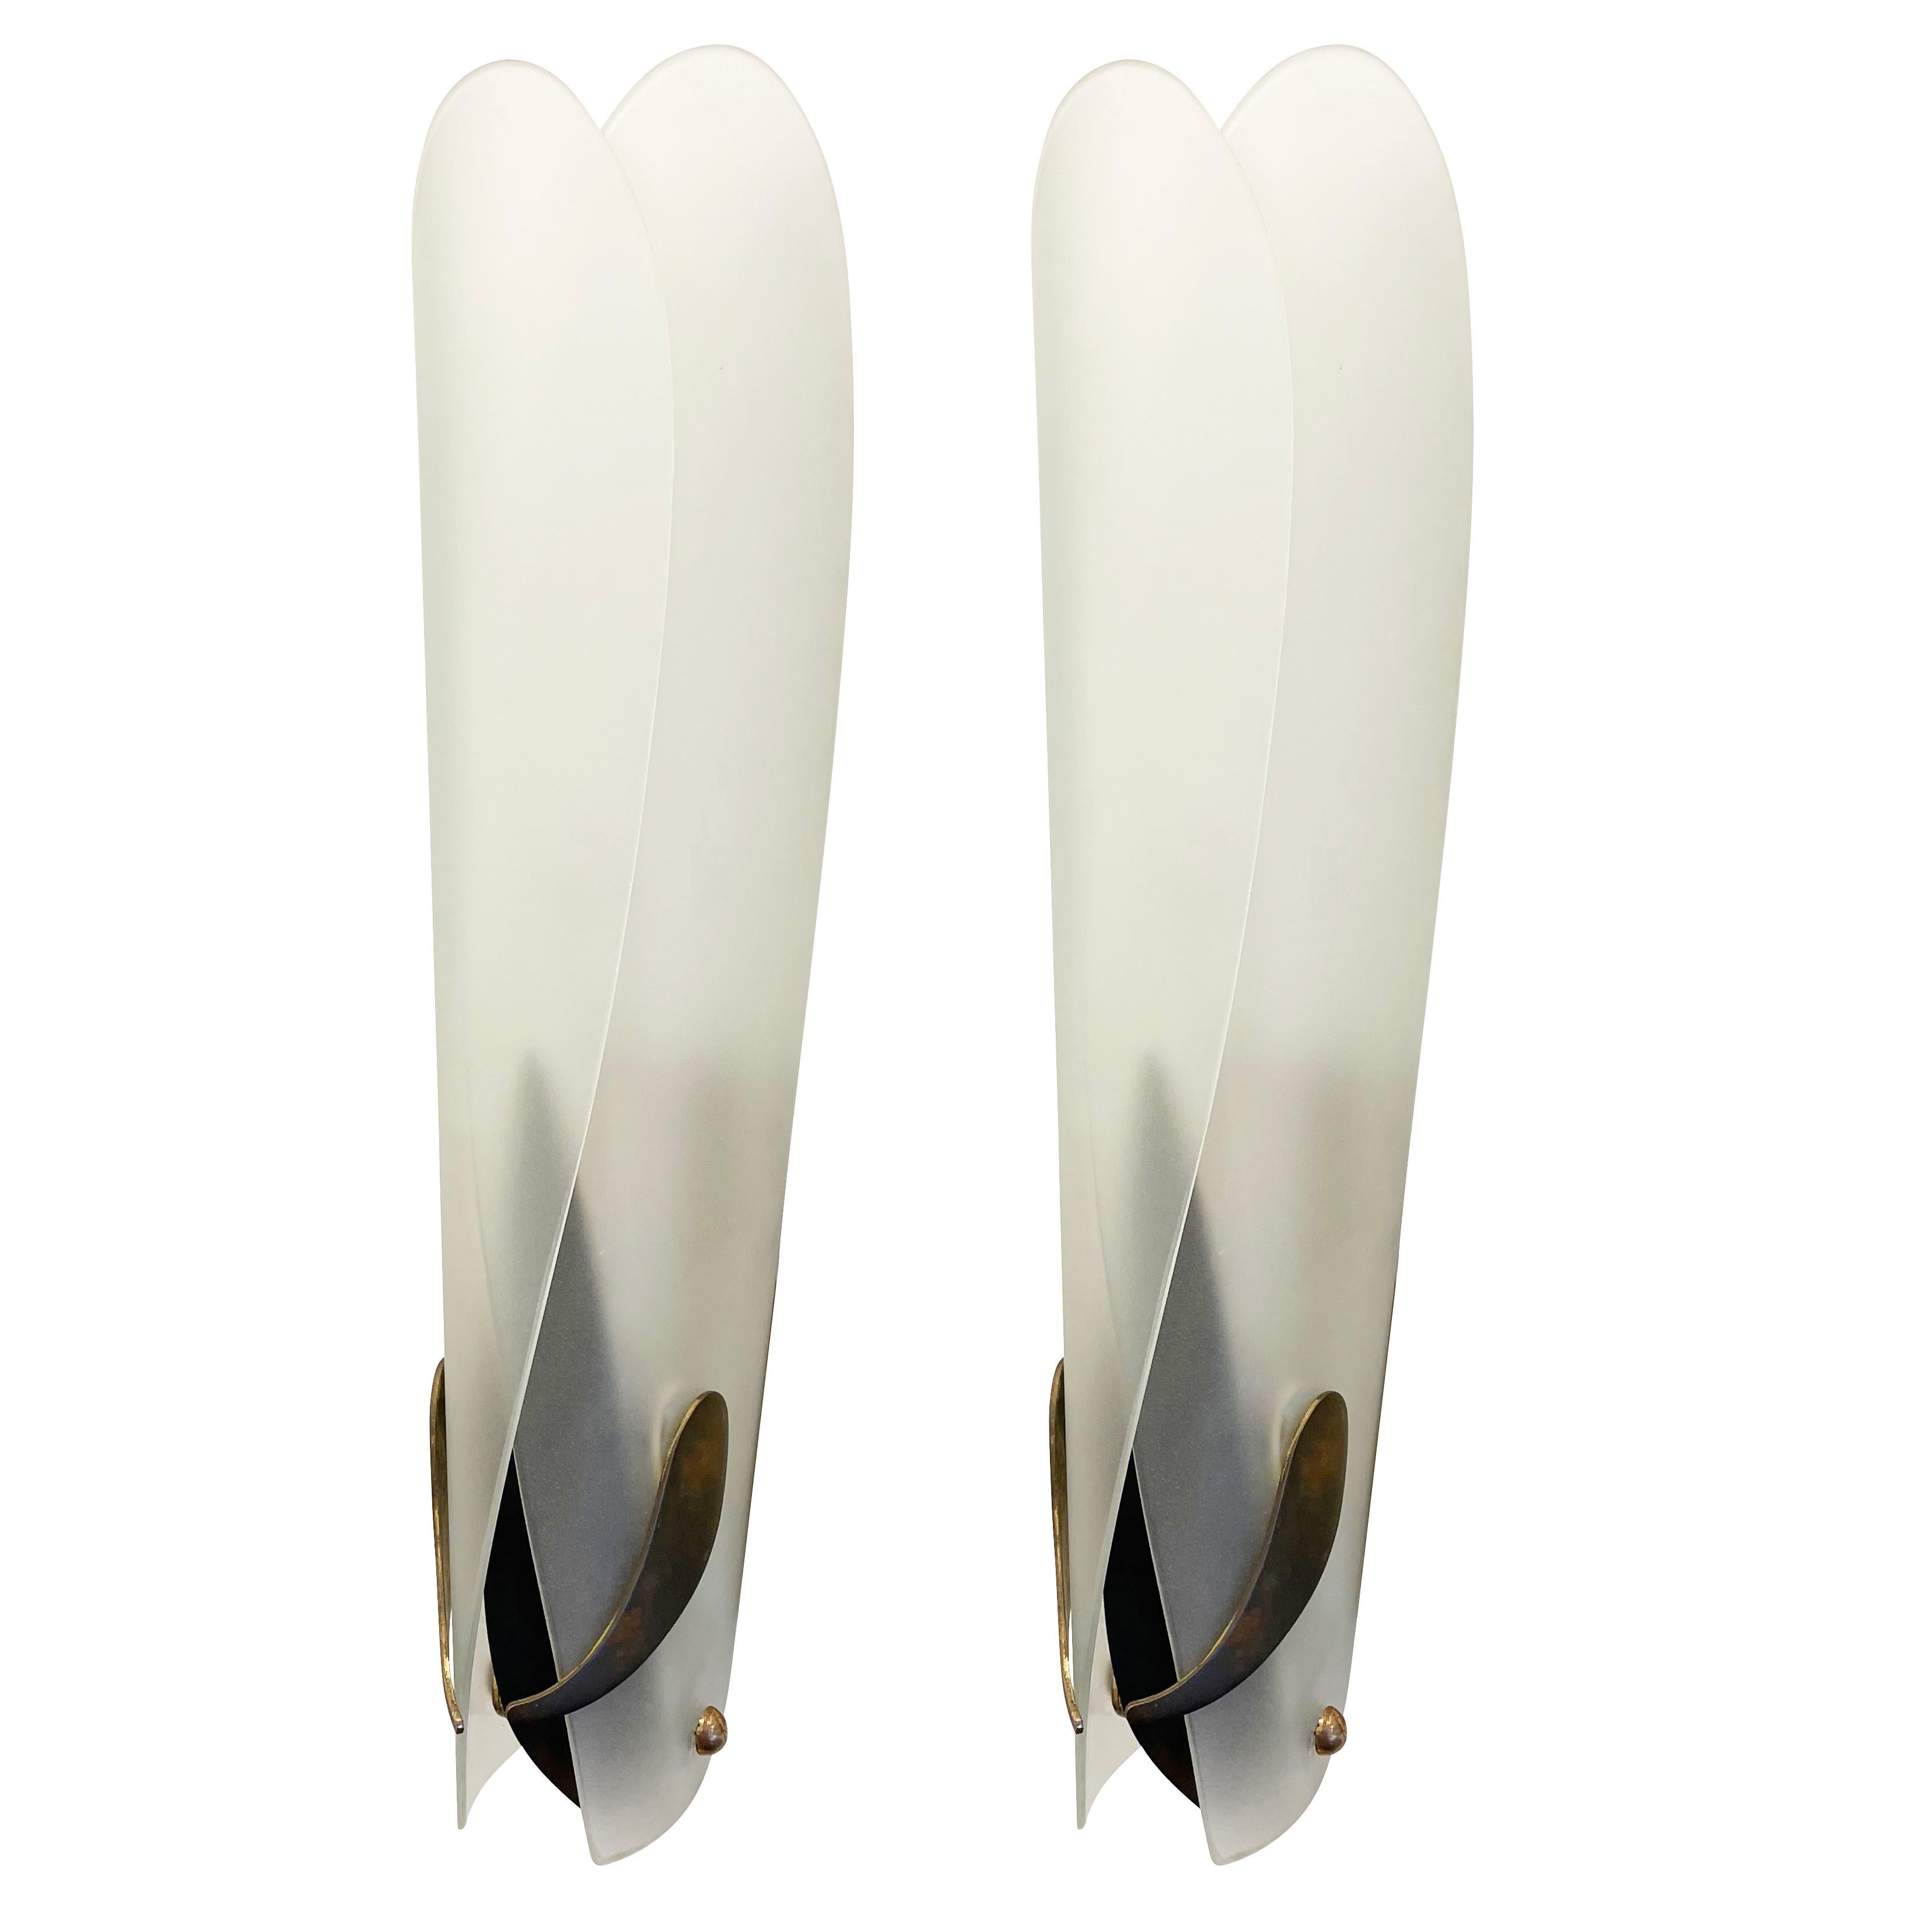 Pair of rare Fontana Arte wall lights designed by Max Ingrand in the late 1950s. Each features two overlapping frosted glass shades on a brass frame. Each holds one Edison socket.

Condition: Excellent vintage condition, minor wear consistent with